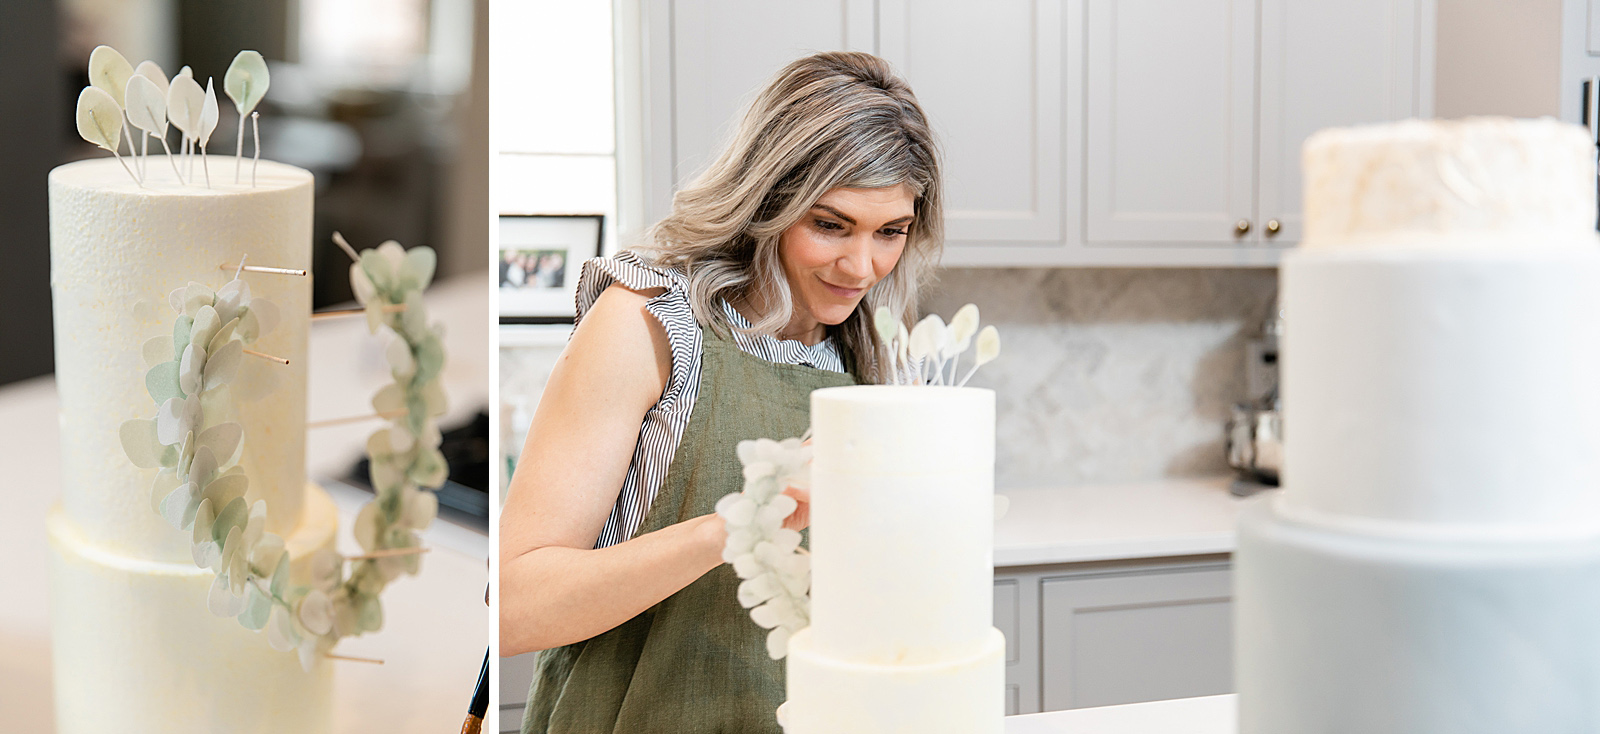 Behind the scenes wafer wedding cake creation by XO Cakery